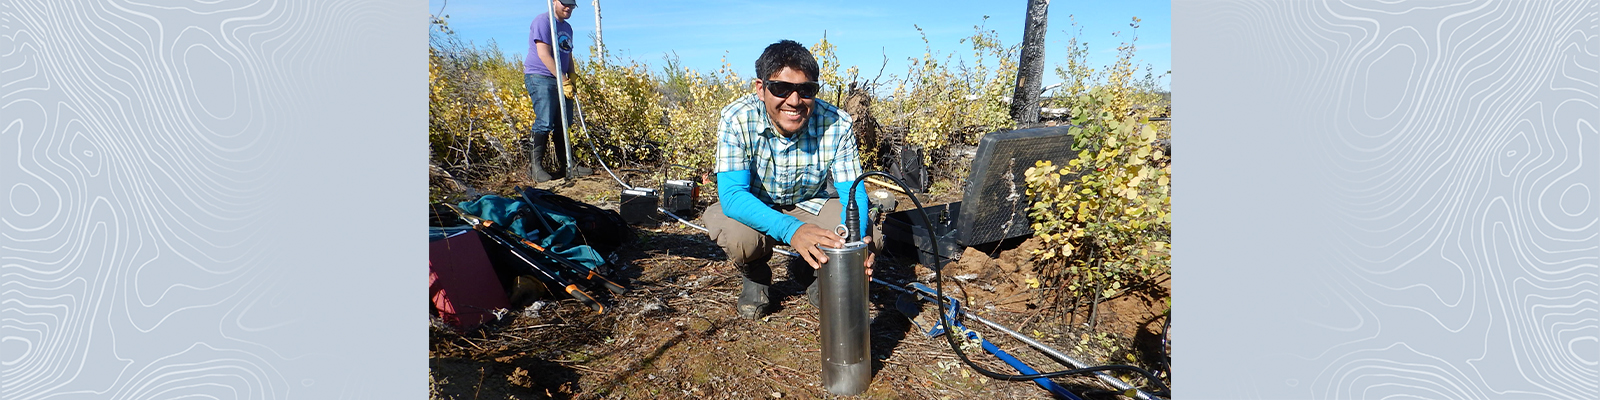 Researcher in the field with equipment